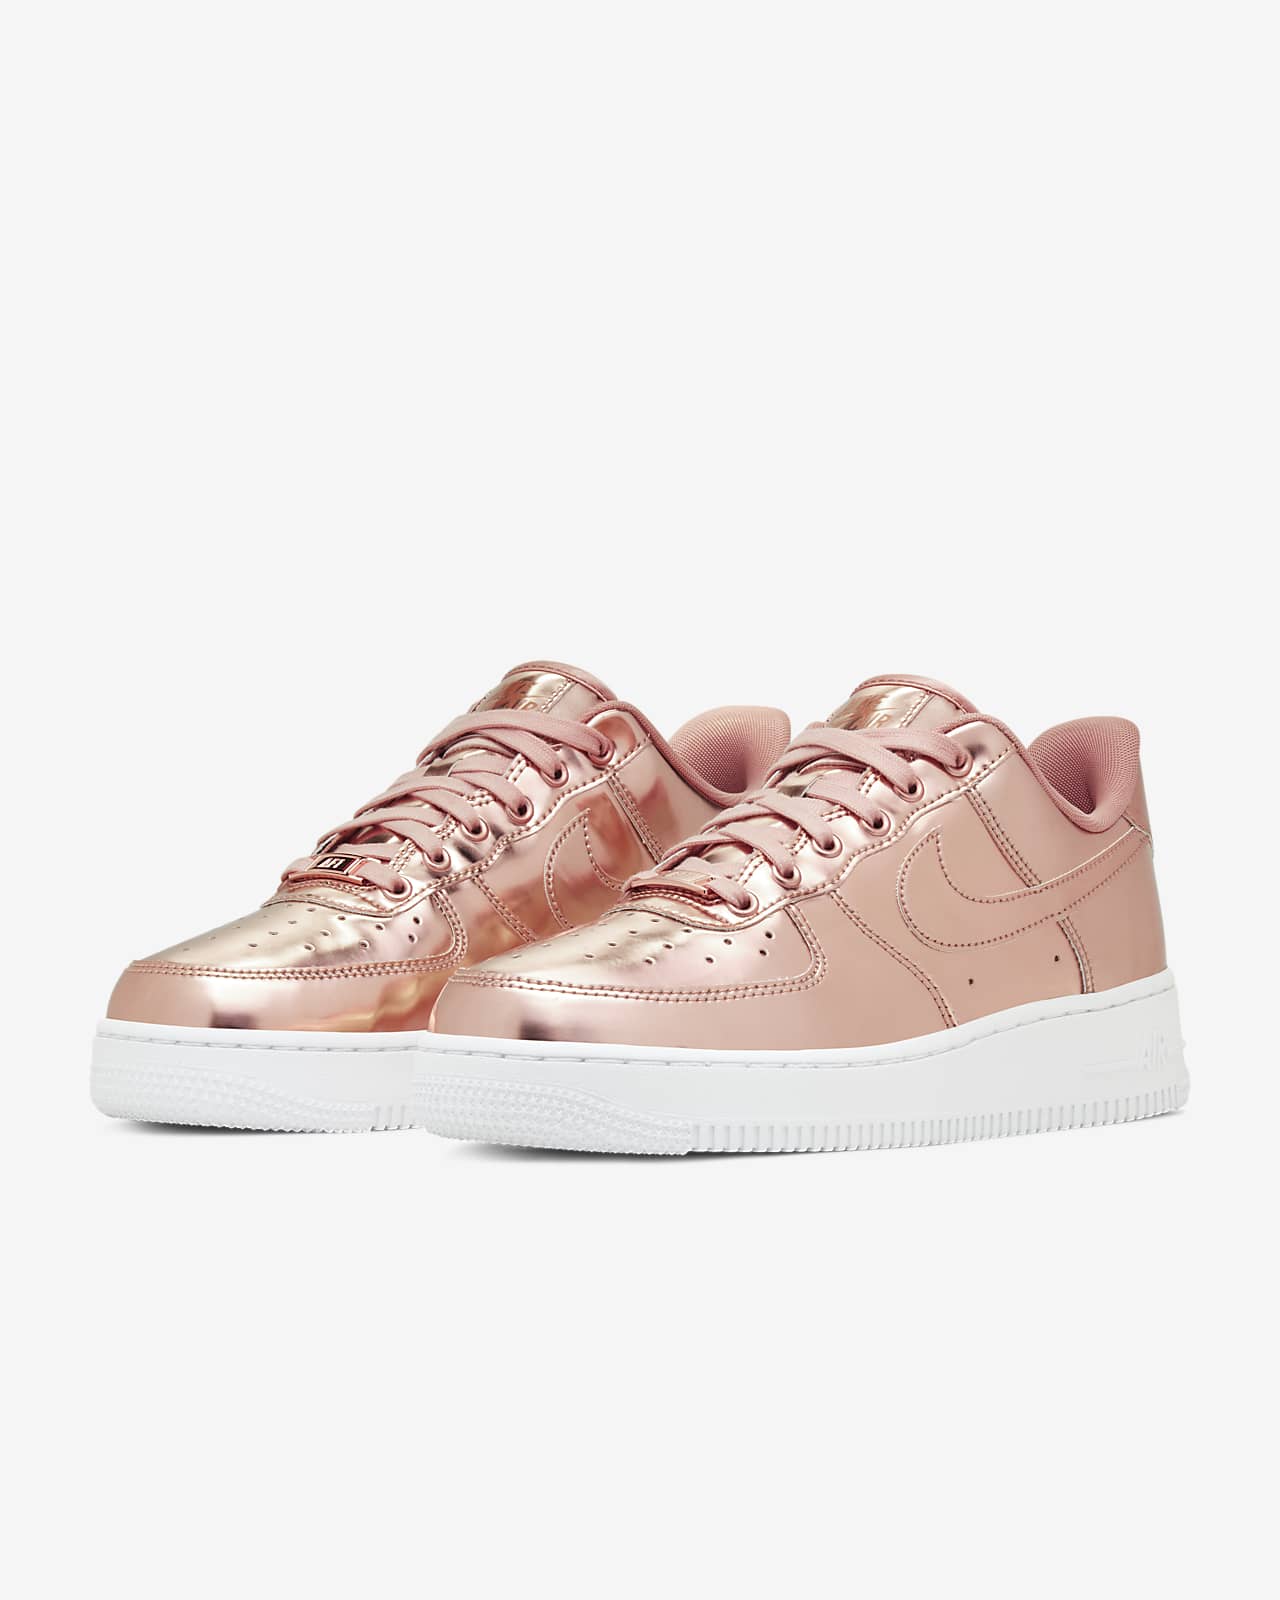 Nike Air Force 1 SP Women's Shoes